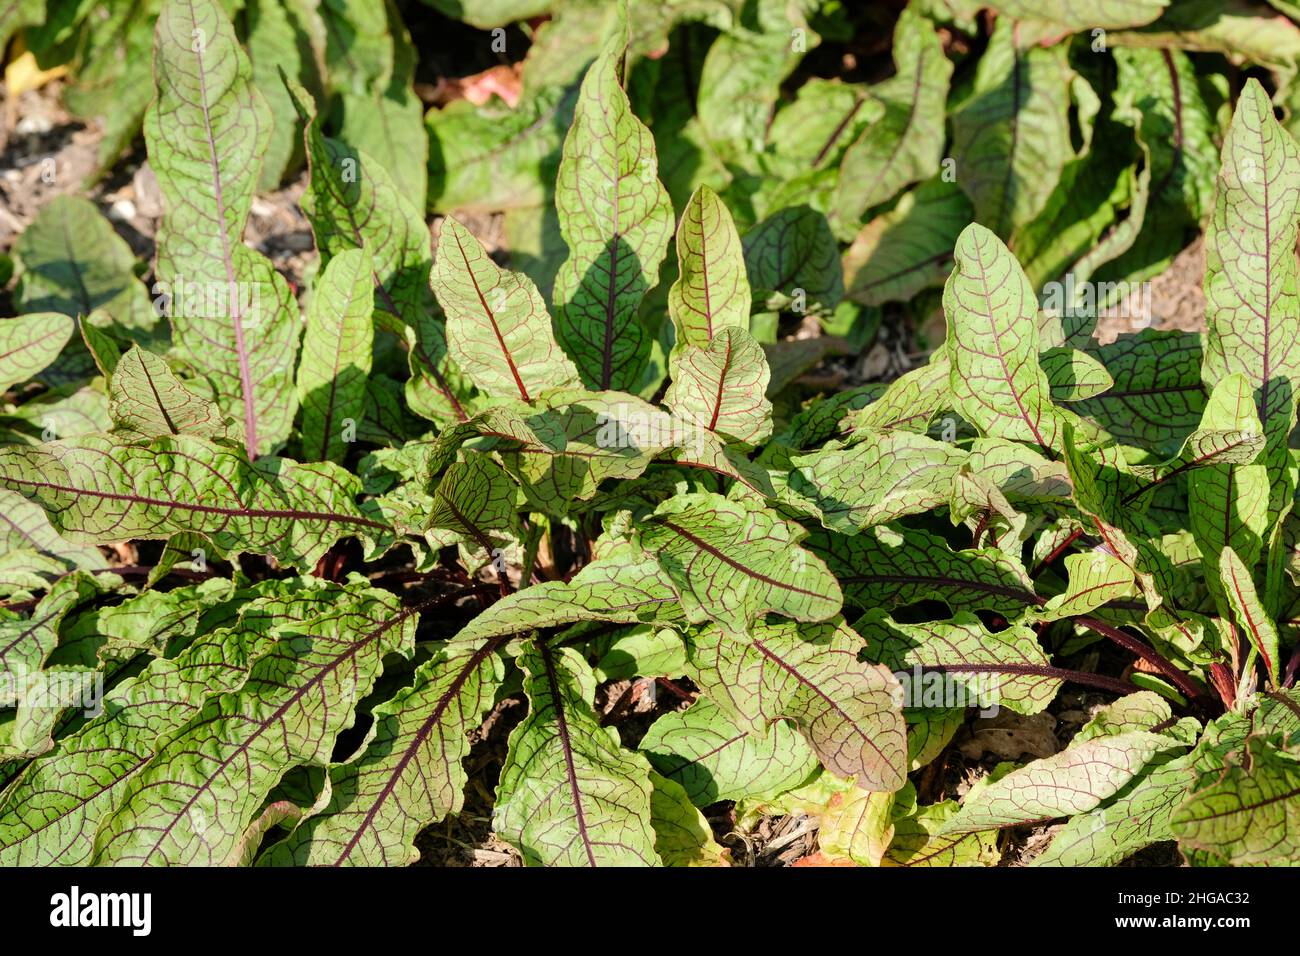 Rumex sanguineus, Red-veined sorrel, Bloody dock plant. Perennial herb growing in a bed Stock Photo